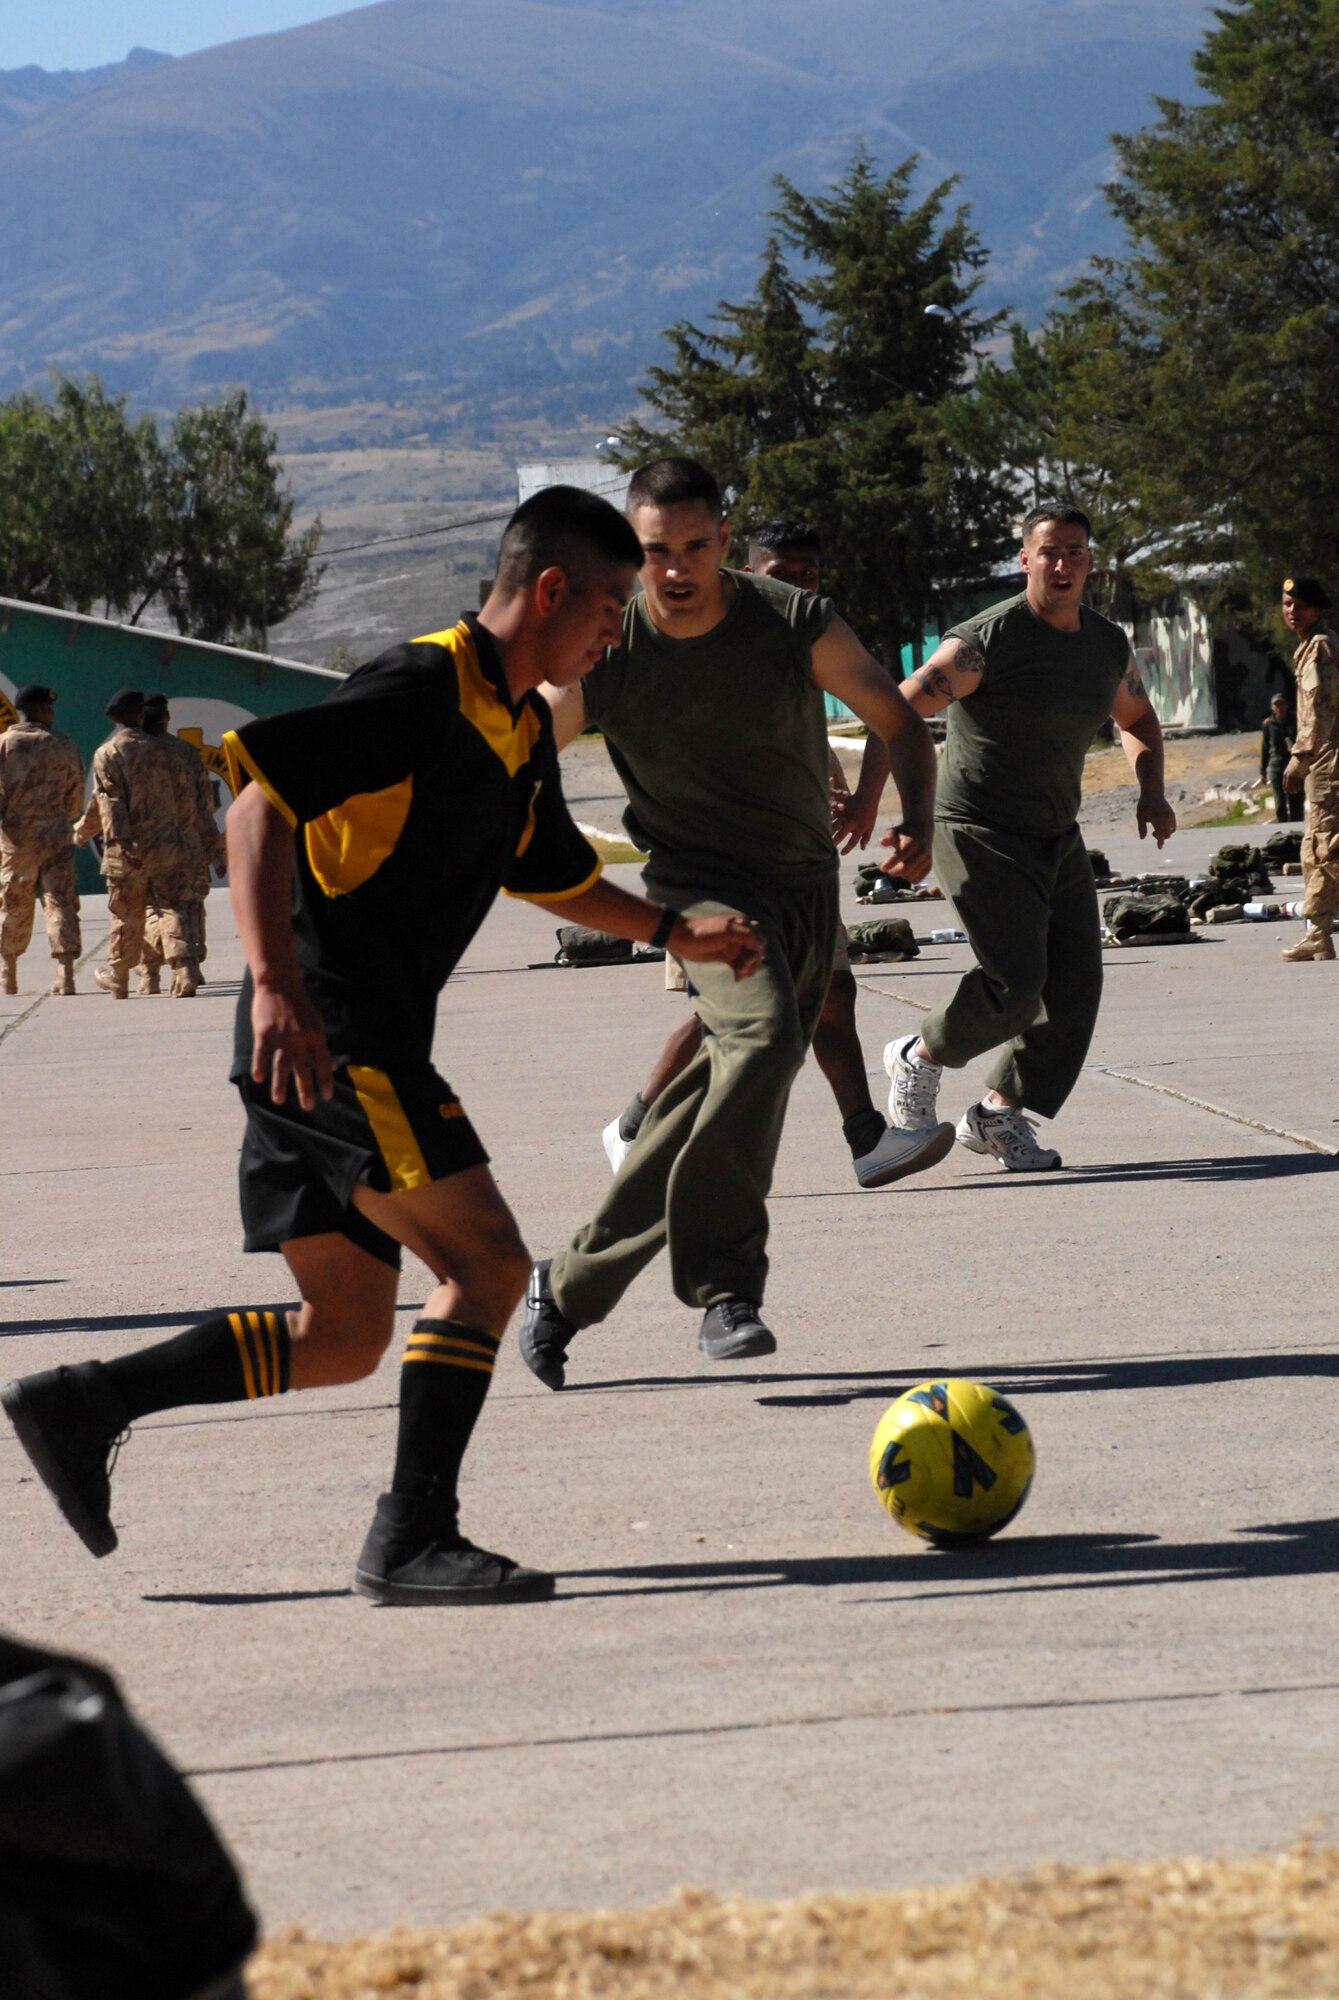 U.S. Marine Lance Cpl. Matthew Carroll, assigned to Task Force New Horizons, attempts to steal the ball from a Peruvian soldier during a soccer game, June 8, on a Peruvian Army base in Ayacucho, Peru, the region benefiting from the humanitarian efforts of New Horizons Peru-2008. New Horizons is a U.S. and Peruvian partnered effort to help underprivileged Peruvians by building schools, clinics, and wells. (U.S. Air Force photo/Airman 1st Class Tracie Forte)